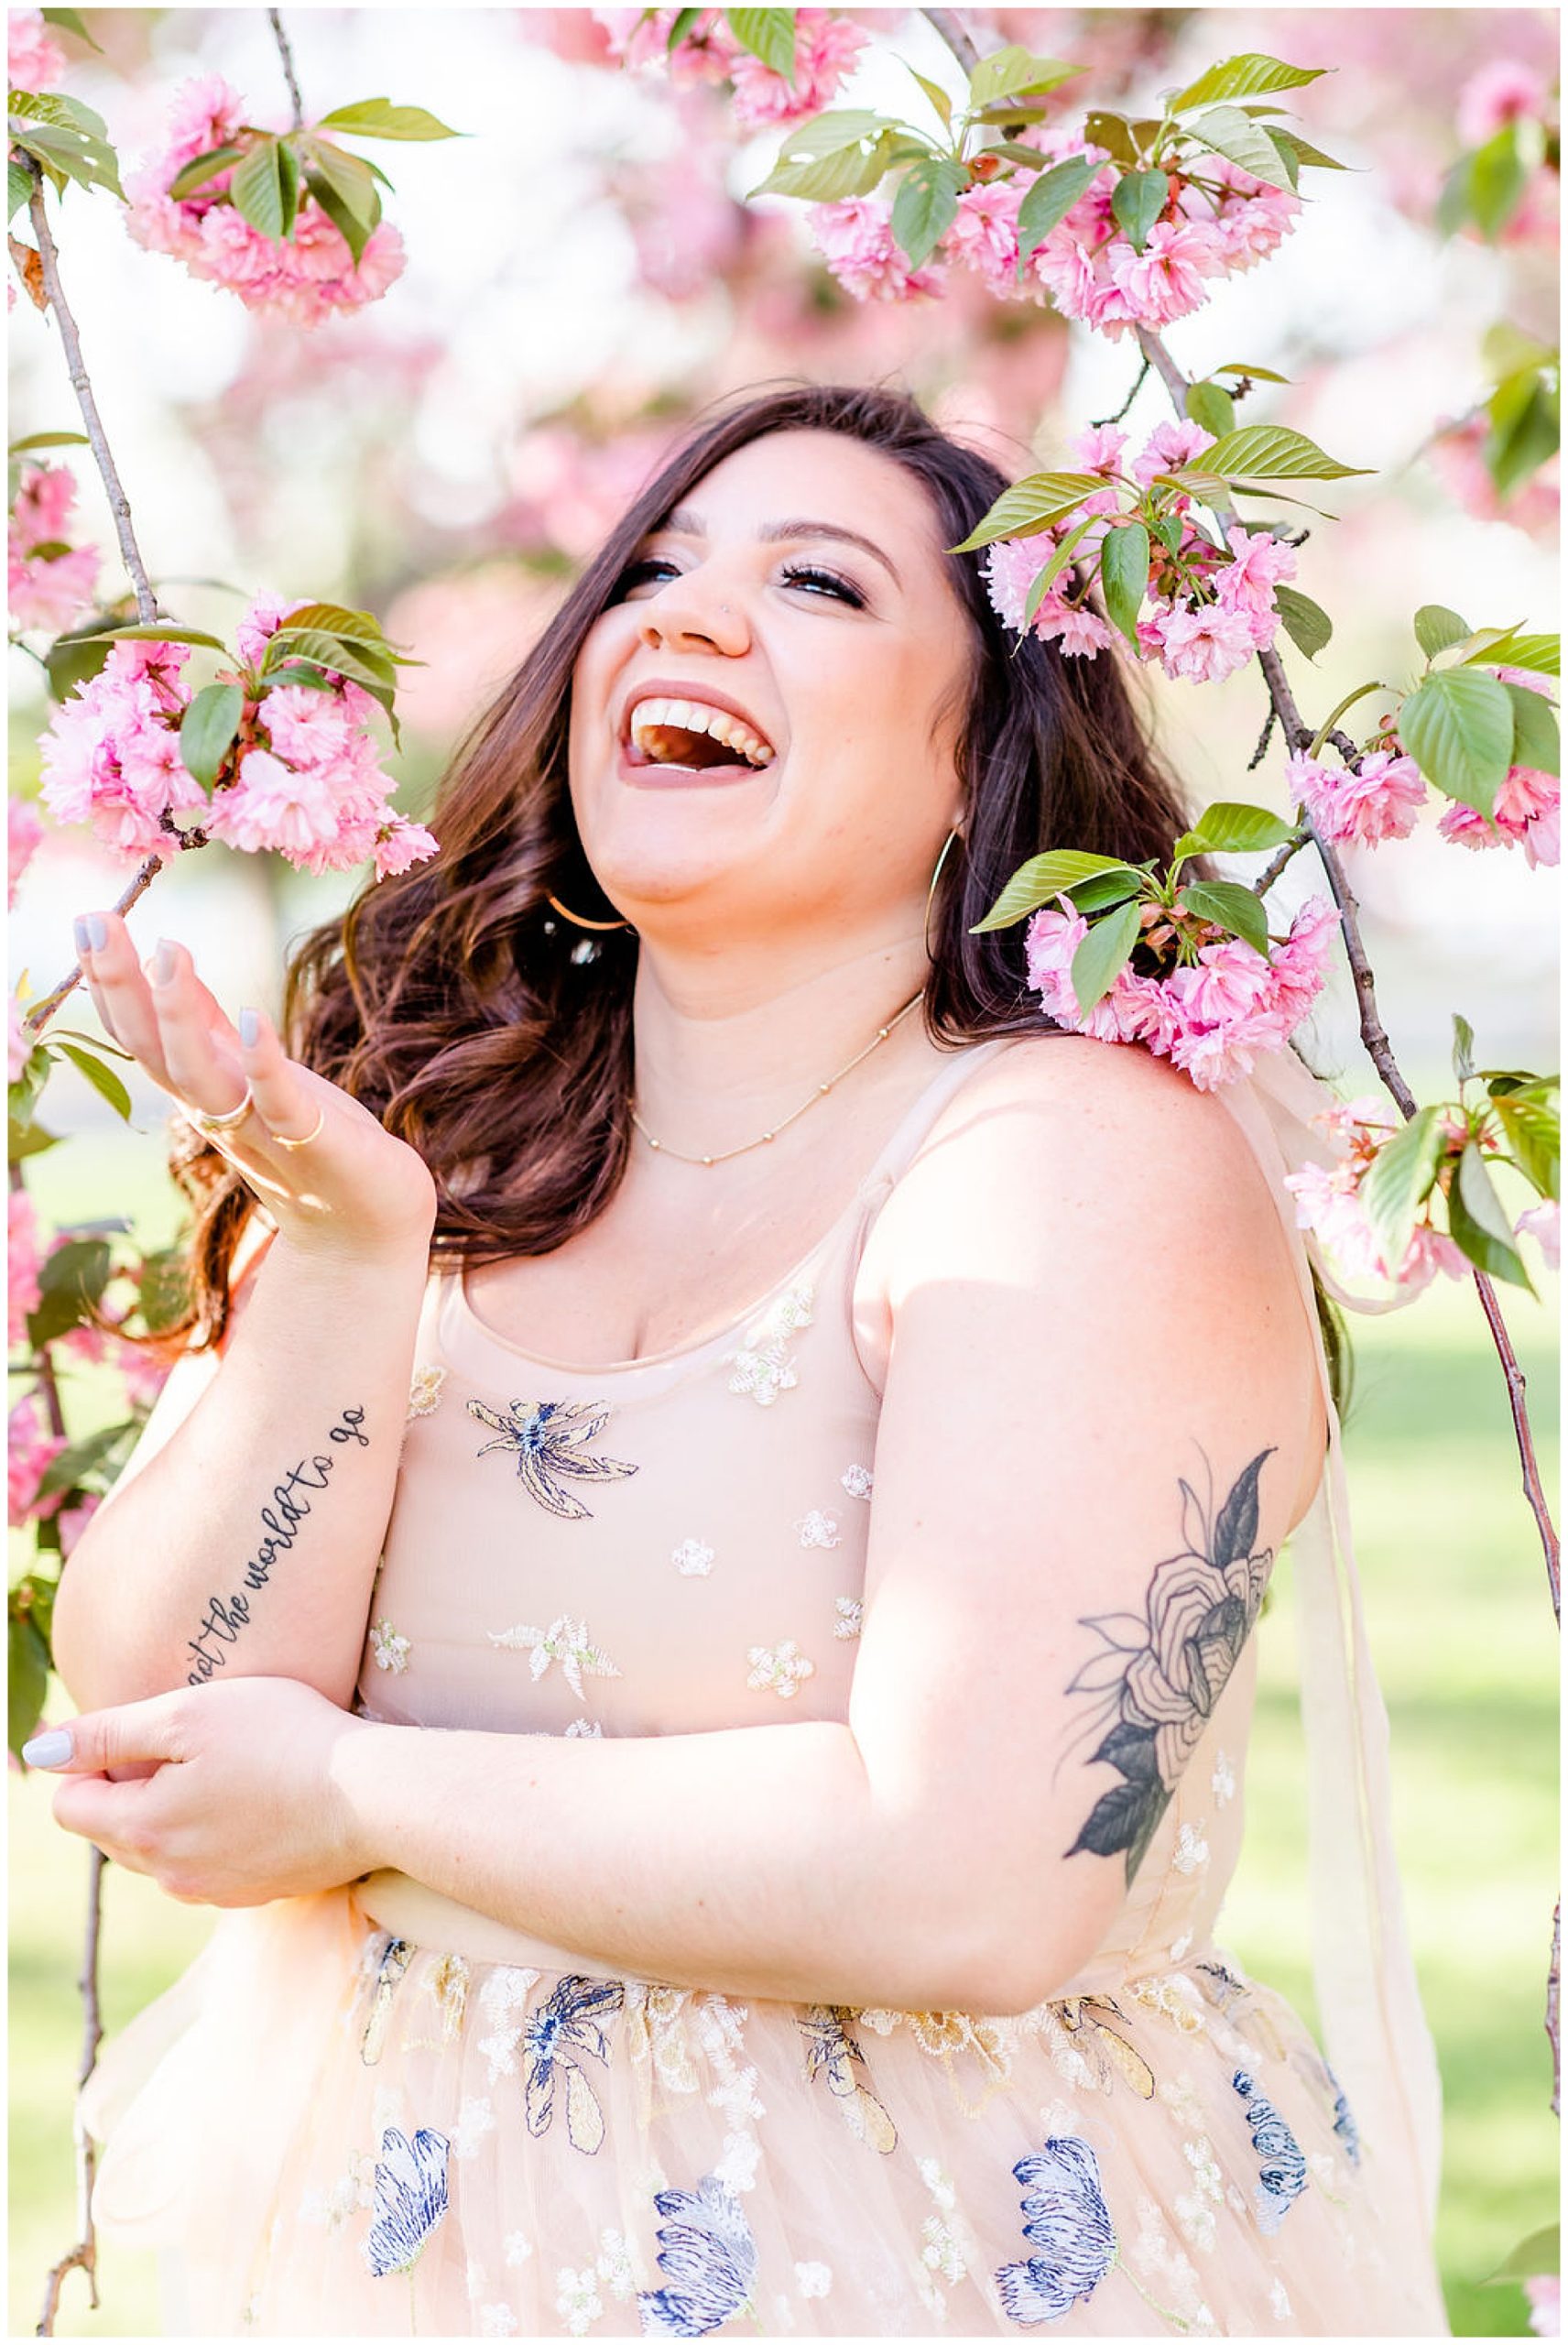 kwanzan cherry blossoms ballgown photos, cherry blossom portraits, kwanzan cherry blossom portraits, D.C. cherry blossoms, spring portriats, just because photos, just because portraits, cherry blossom headshots, Rachel E.H. Photography, woman laughing, woman with tattoos, woman reaching out for cherry blossom flower